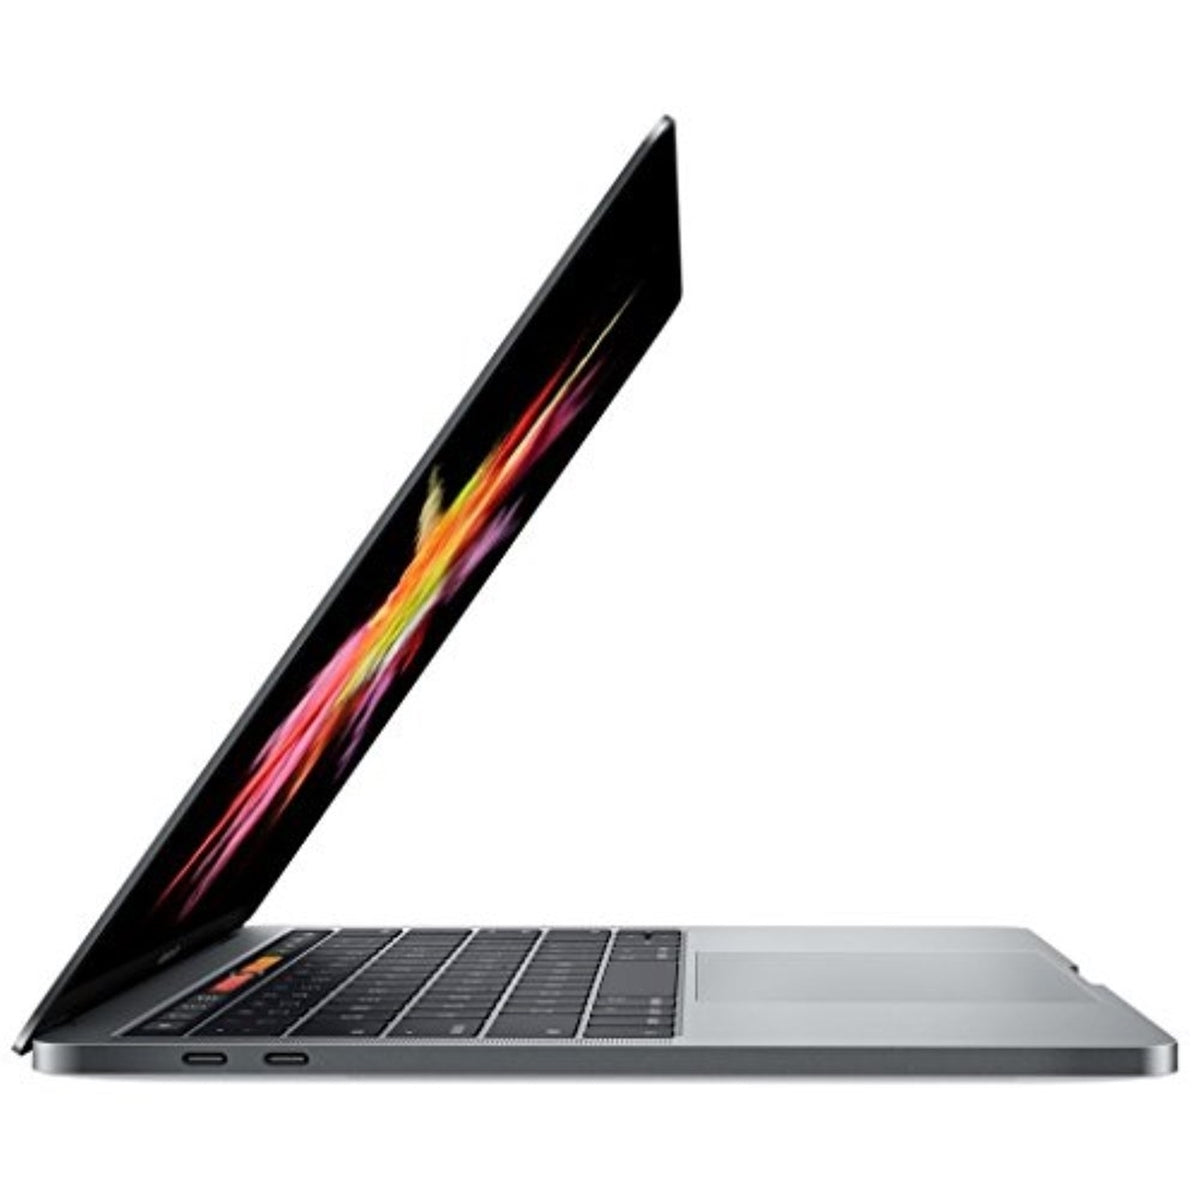 Apple MacBook Pro MUHN2LL/A (2019) 13.3&quot; 8GB 4.1TB SSD Core™ i5-8279U 2.4GHz macOS, Space Gray (Certified Refurbished)